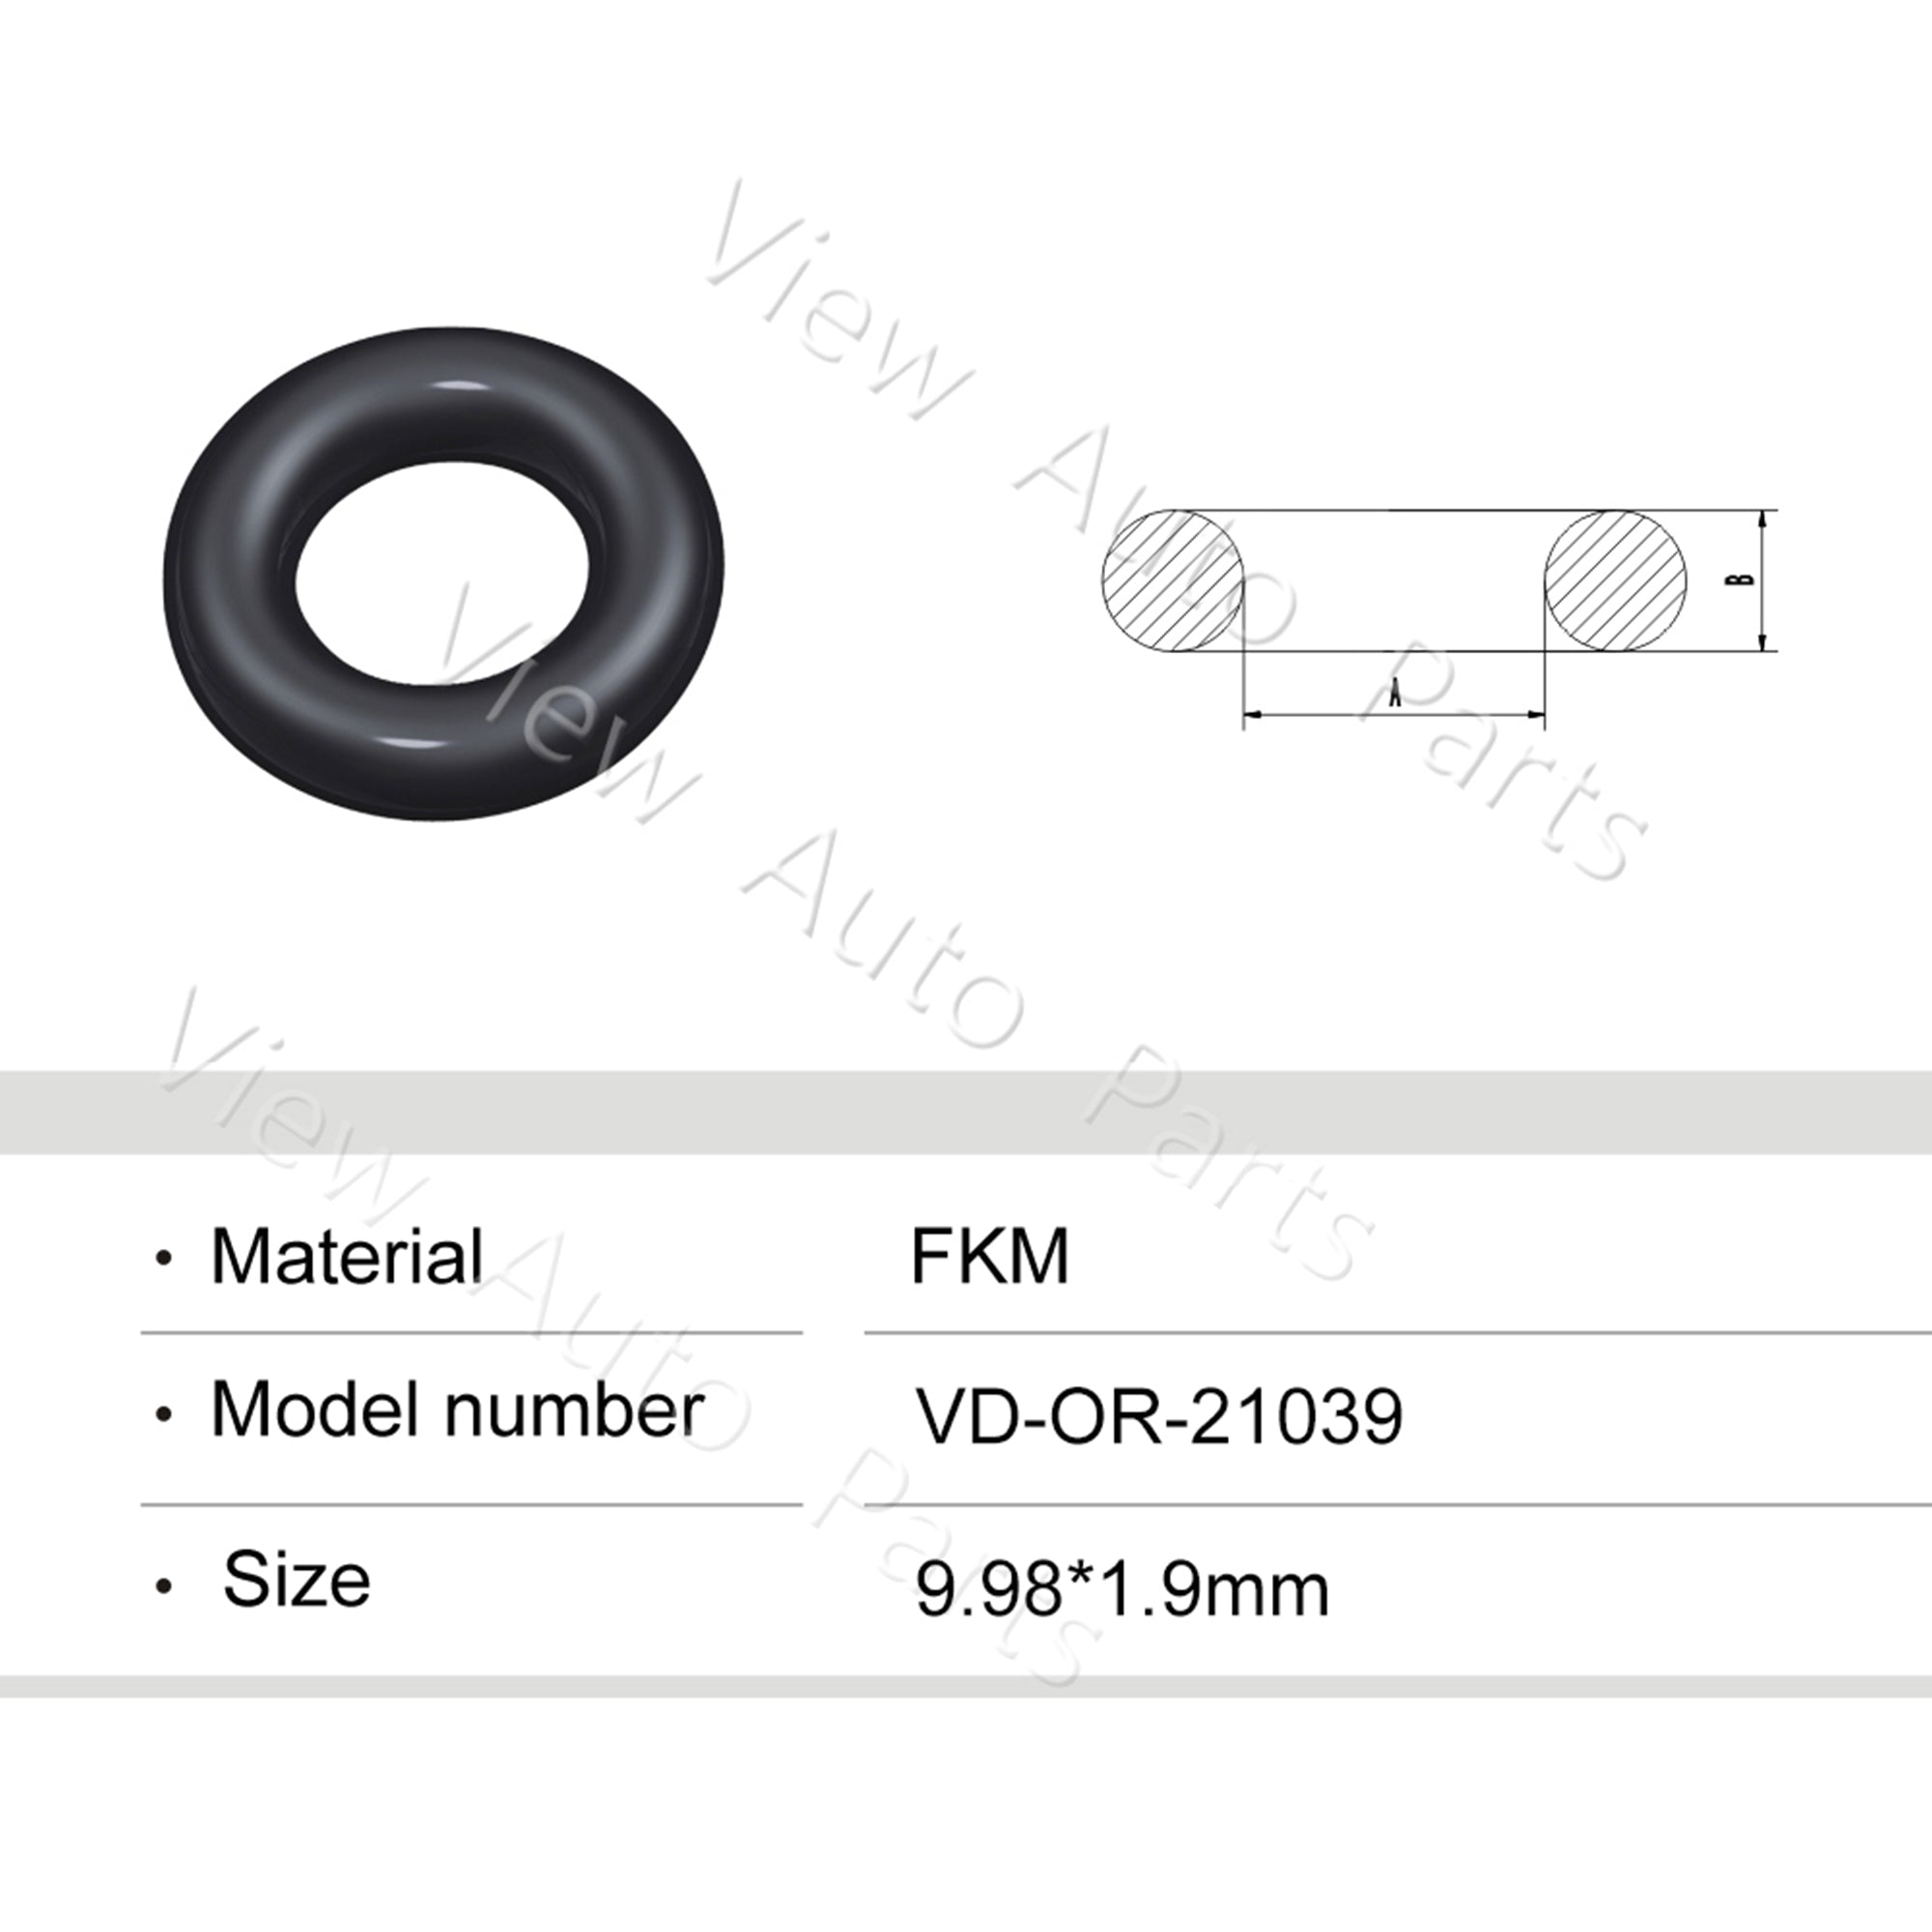 Fuel Injector Rubber Seal Orings for Fuel Injector Repair Kits FKM & Rubber Heat Resistant, Size: 9.98*1.9mm OR-21039